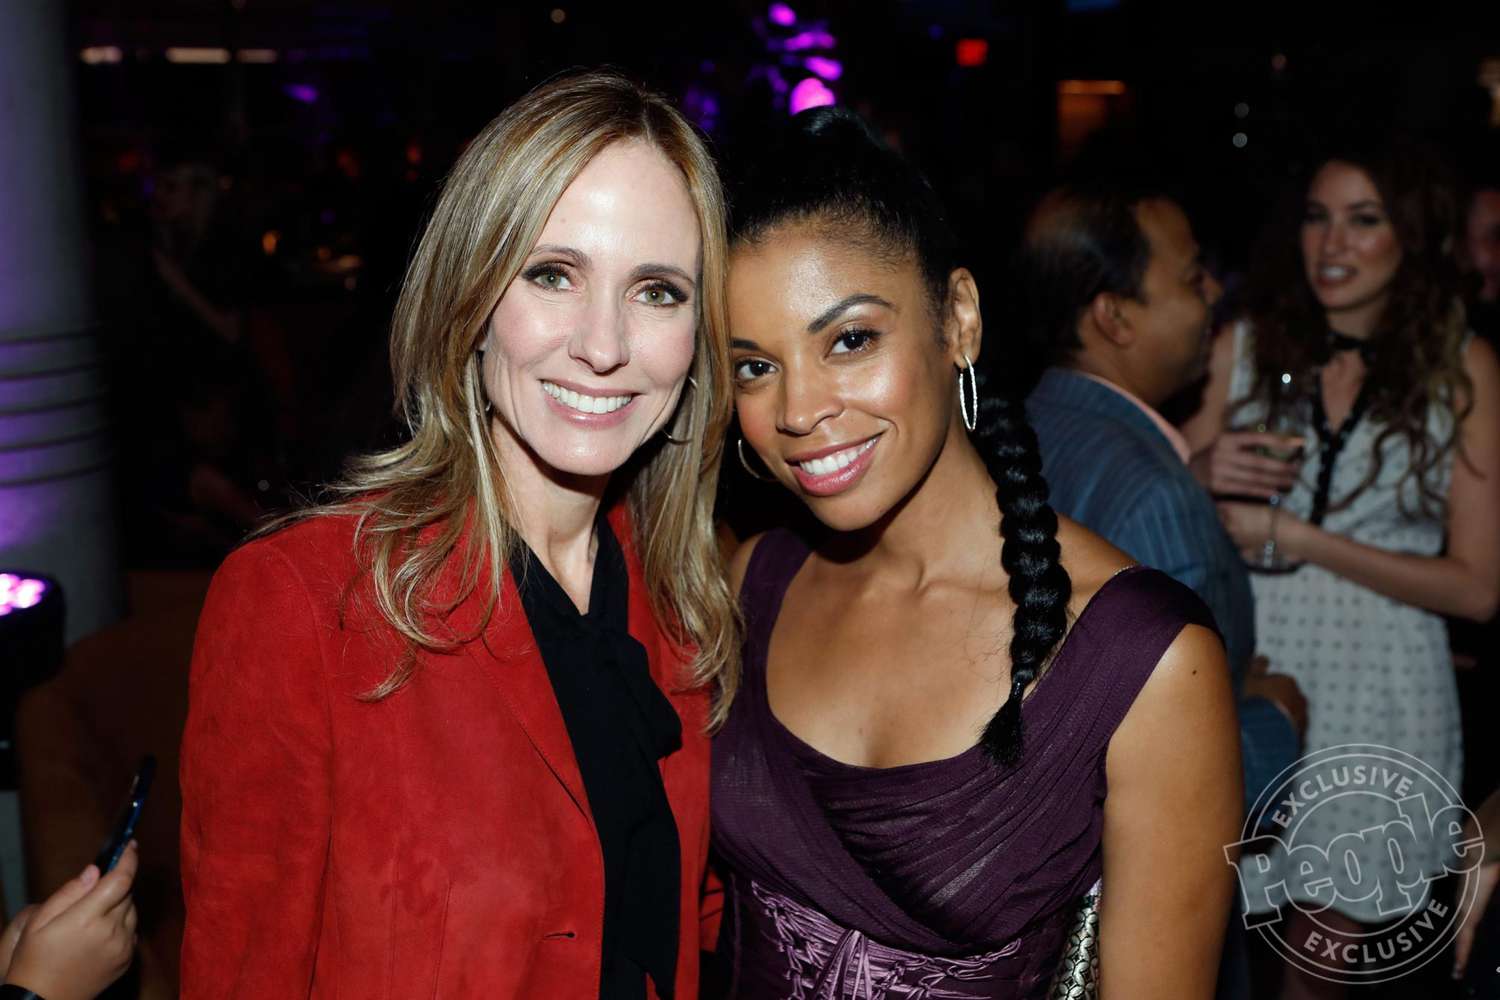 Dana Walden (Co-chairman and CEO of Fox Television) and Susan Kelechi Watson